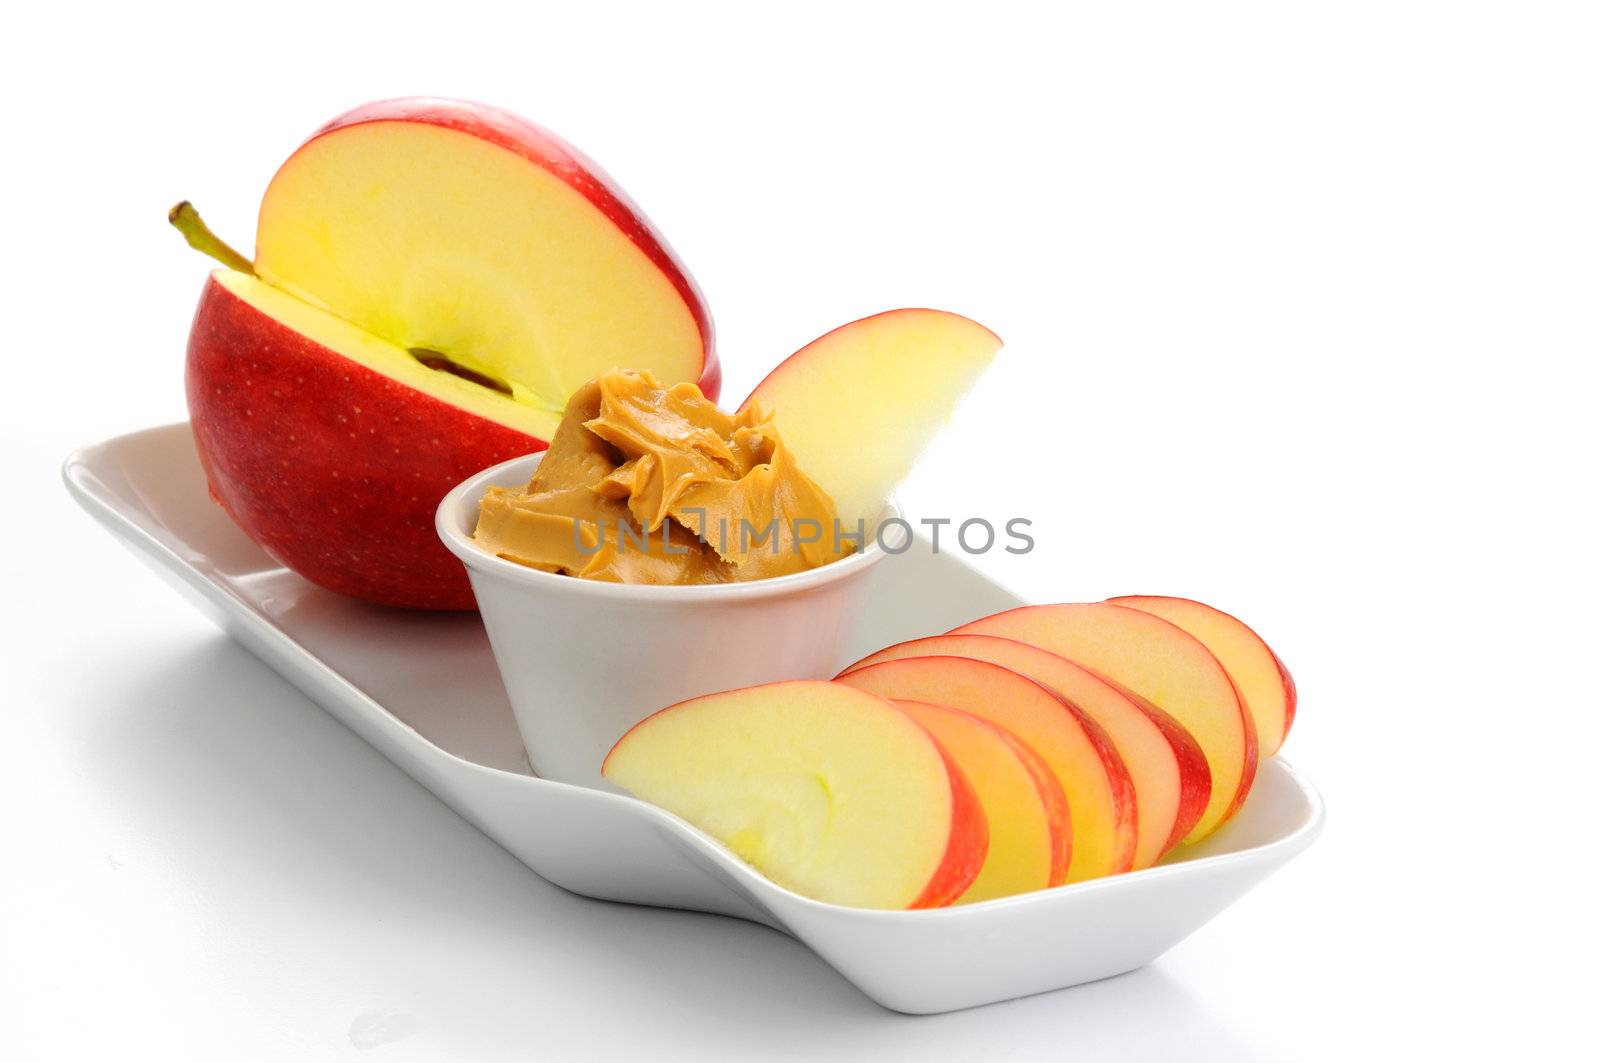 Snack consisting of ripe apple and peanut butter.